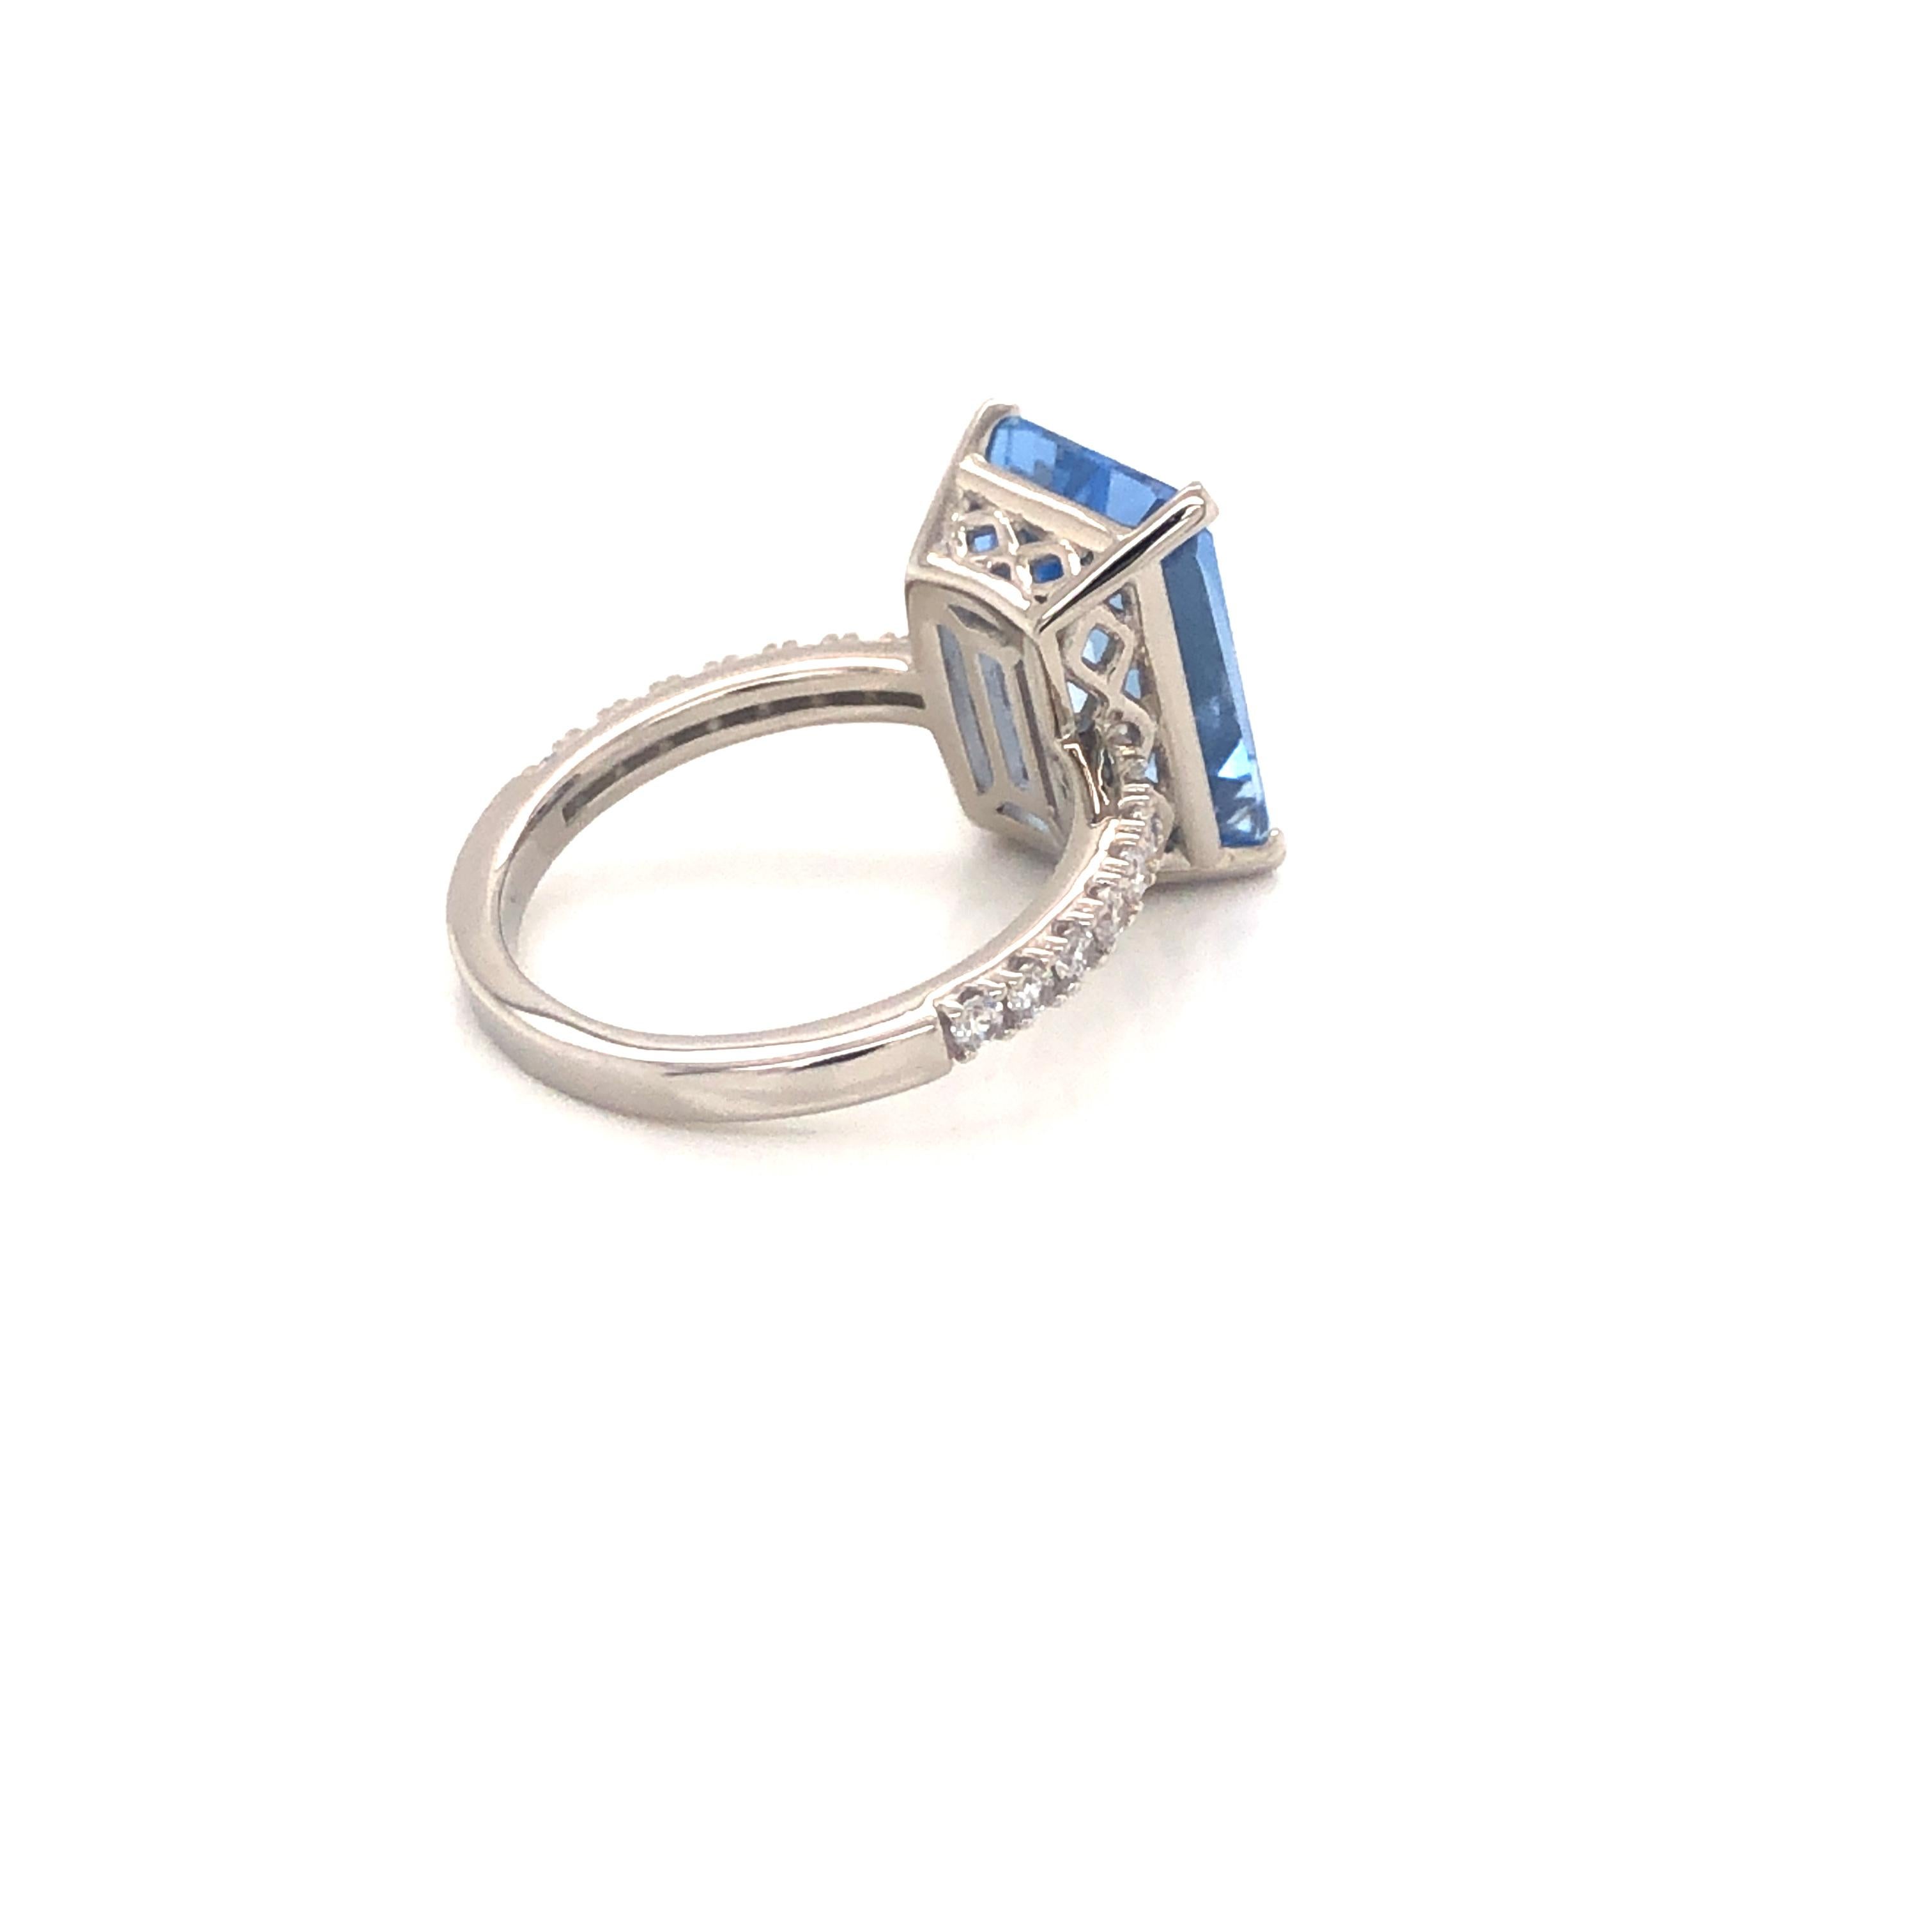 8.0 Carat Emerald Cut Blue Spinel Cubic Zirconia Sterling Silver Engagement Ring For Sale 1